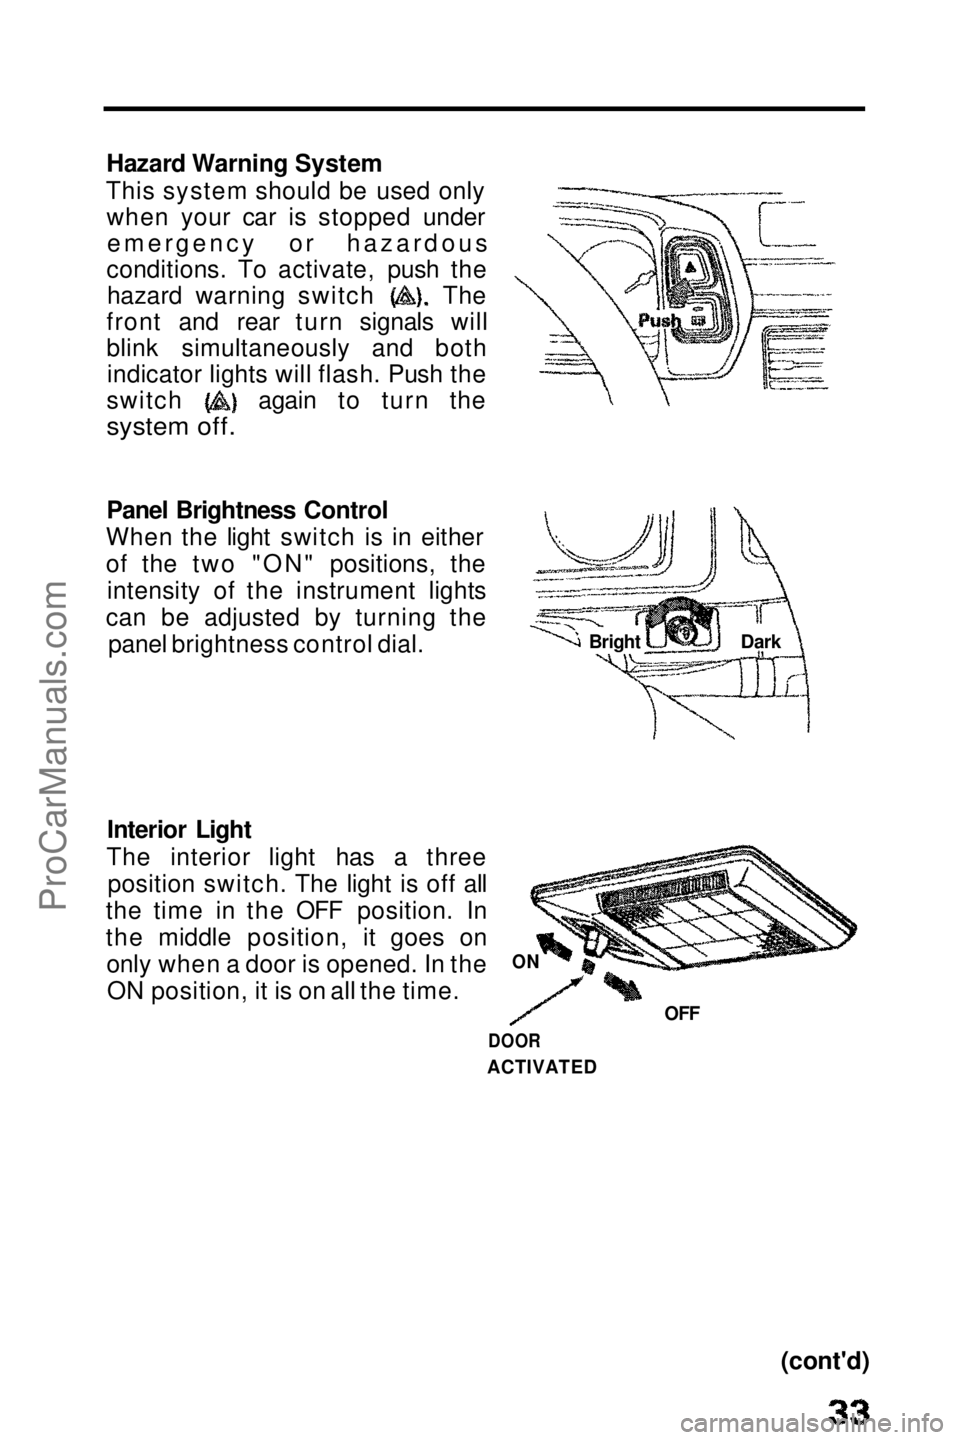 HONDA PRELUDE 1990  Owners Manual 
Hazard Warning System
This system should be used only when your car is stopped underemergency or hazardous
conditions. To activate, push the hazard warning switch The
front and rear turn signals will